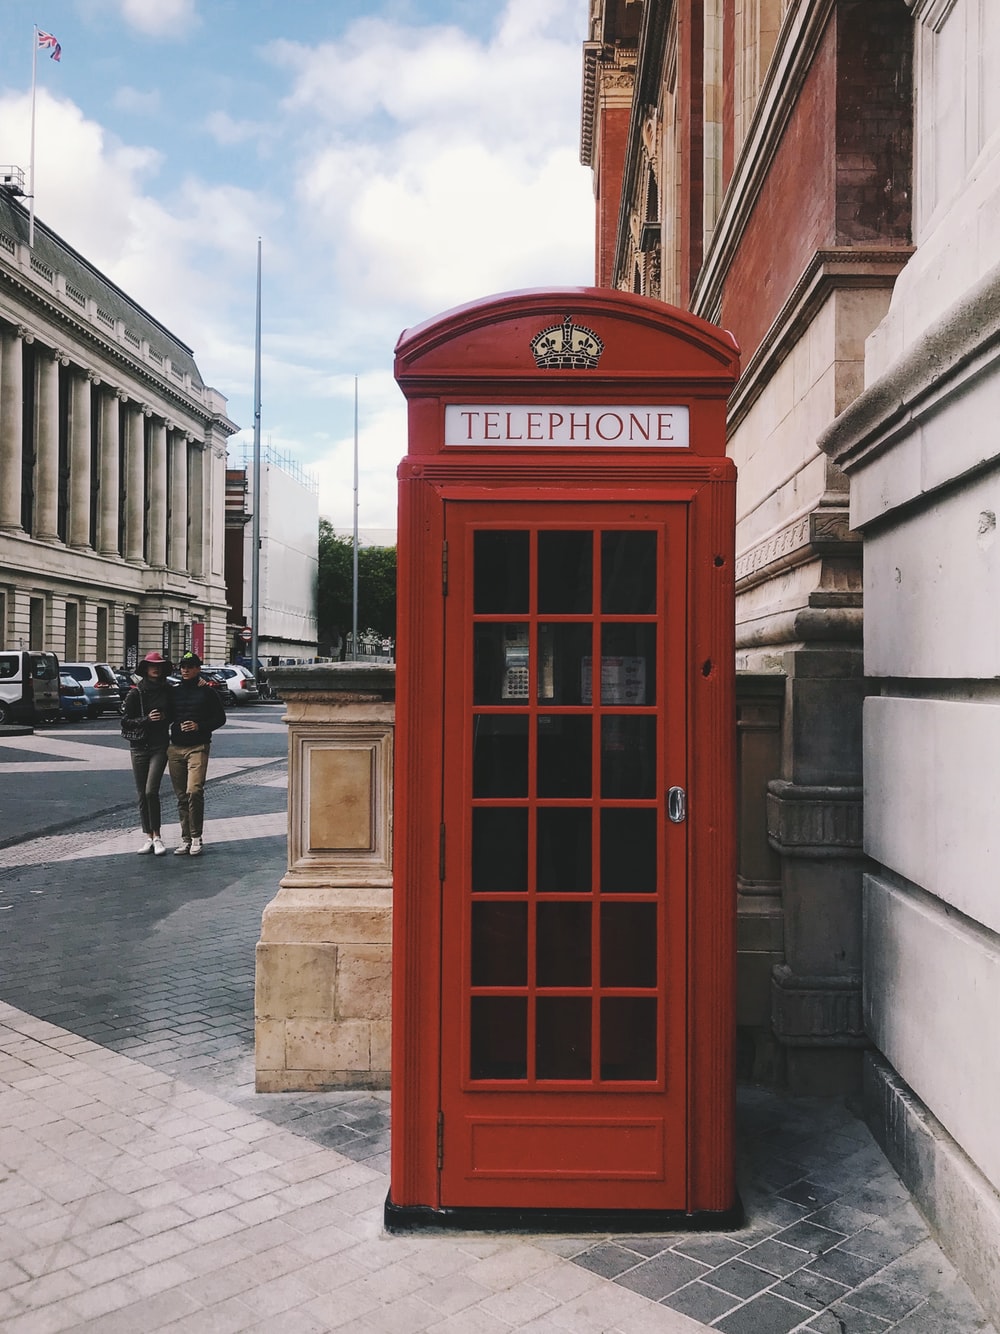 Phone Booth Picture. Download Free Image